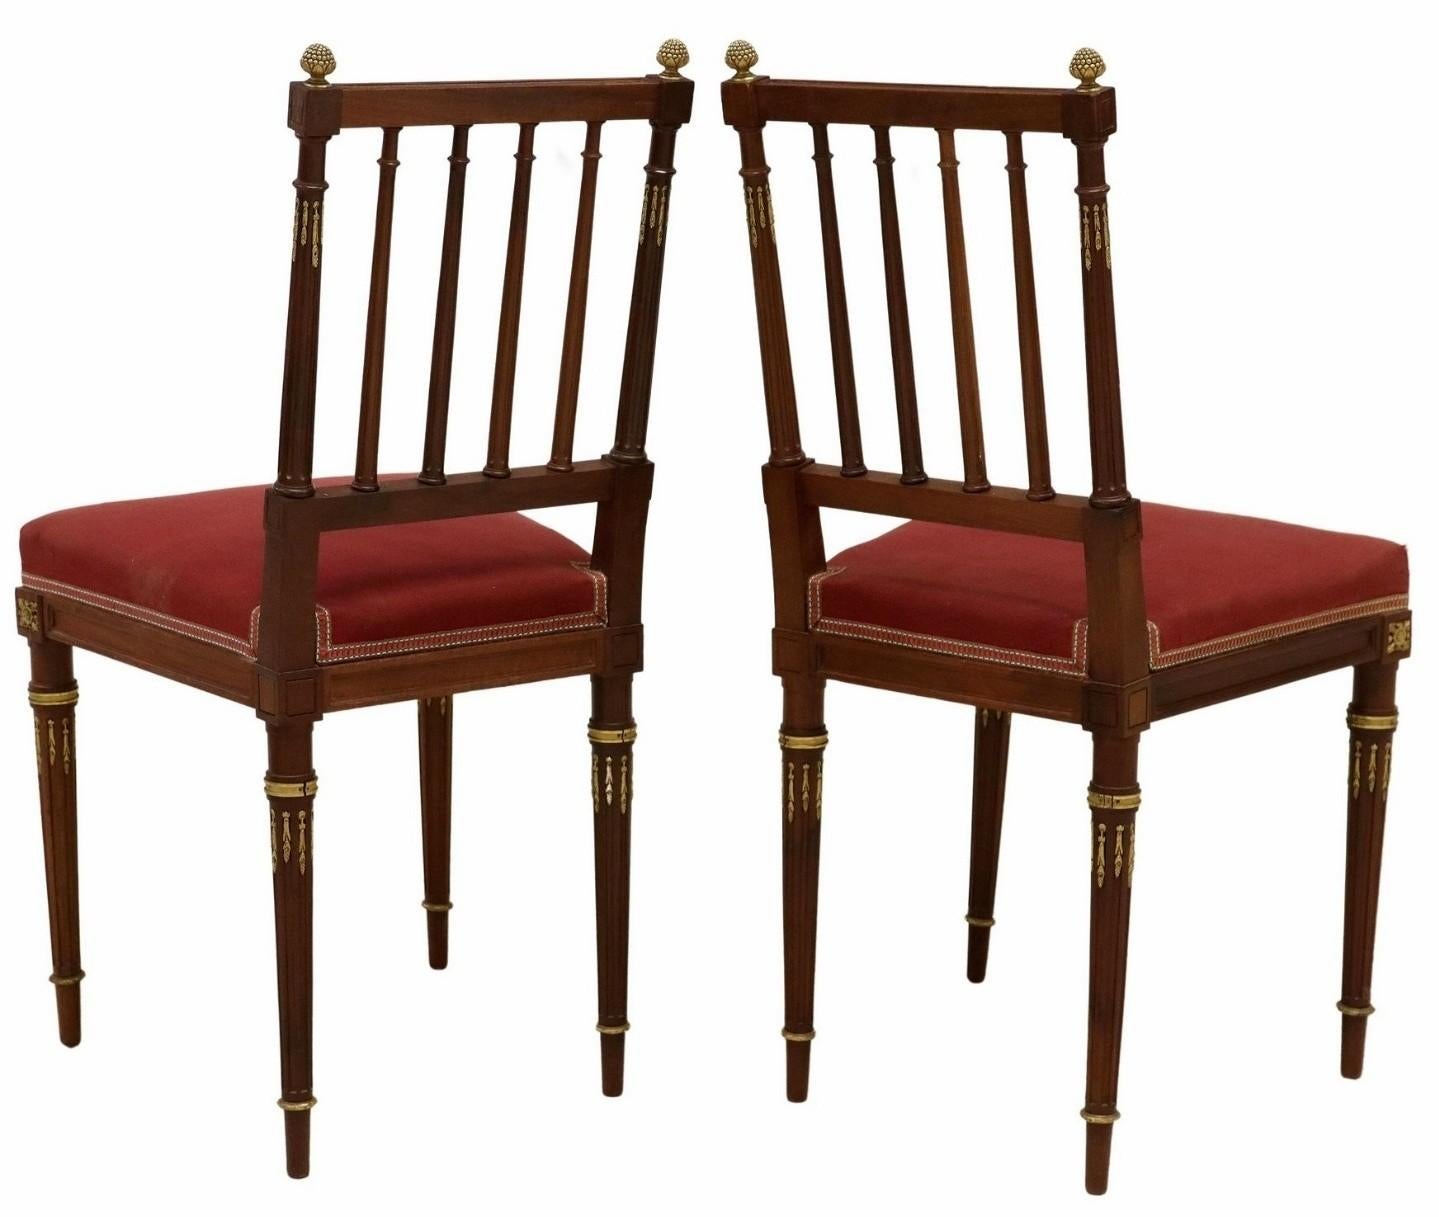 Maison Krieger French Louis XVI Style Ormolu Mounted Mahogany Side Chair Pair  In Good Condition For Sale In Forney, TX